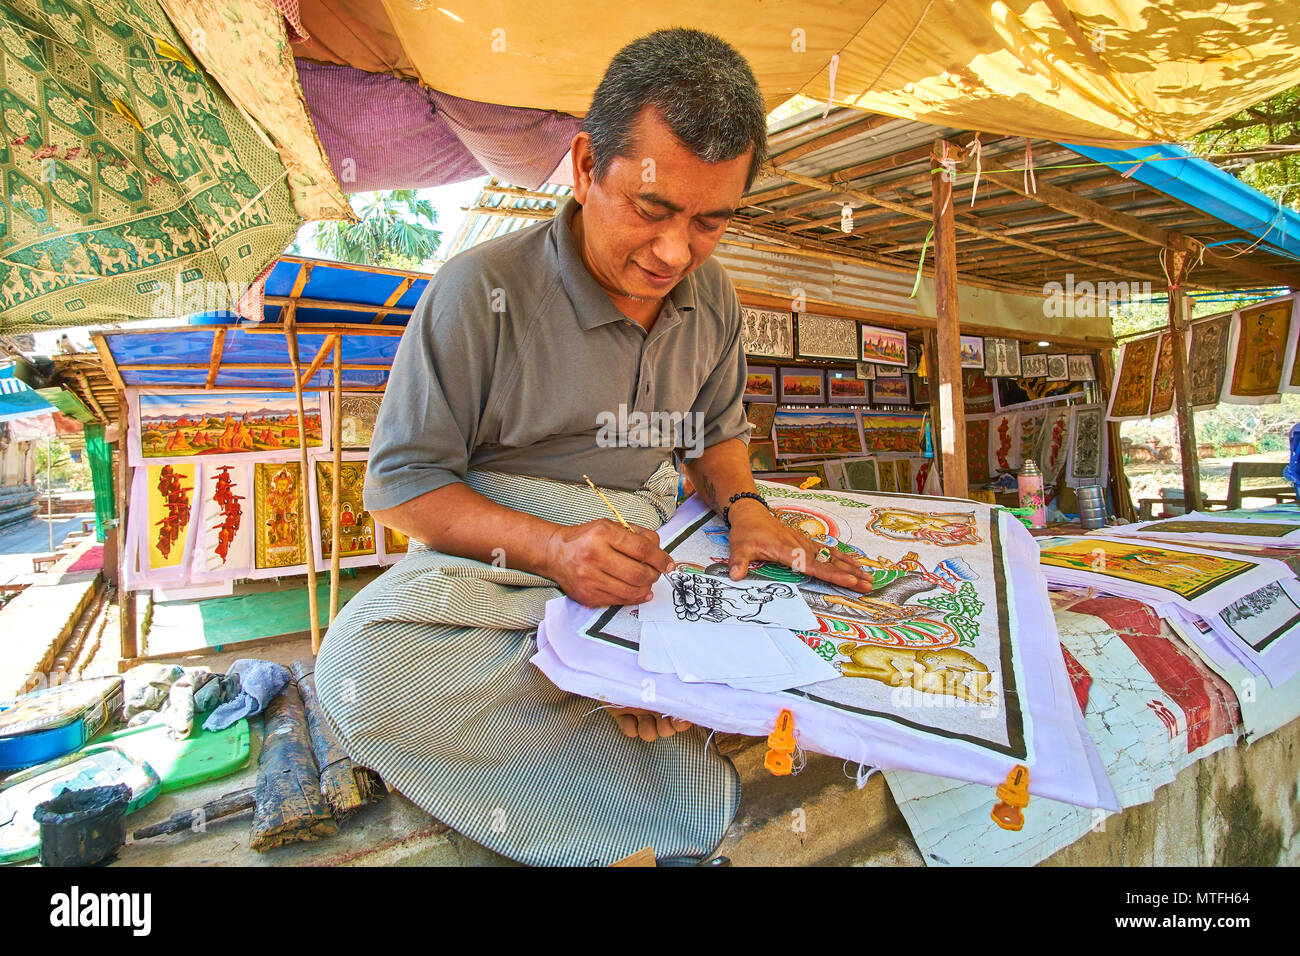 BAGAN, MYANMAR - FEBRUARY 24, 2018: The smiling artist painting an elephant on the paper in traditional burmese style, on February 24 in Bagan Stock Photo